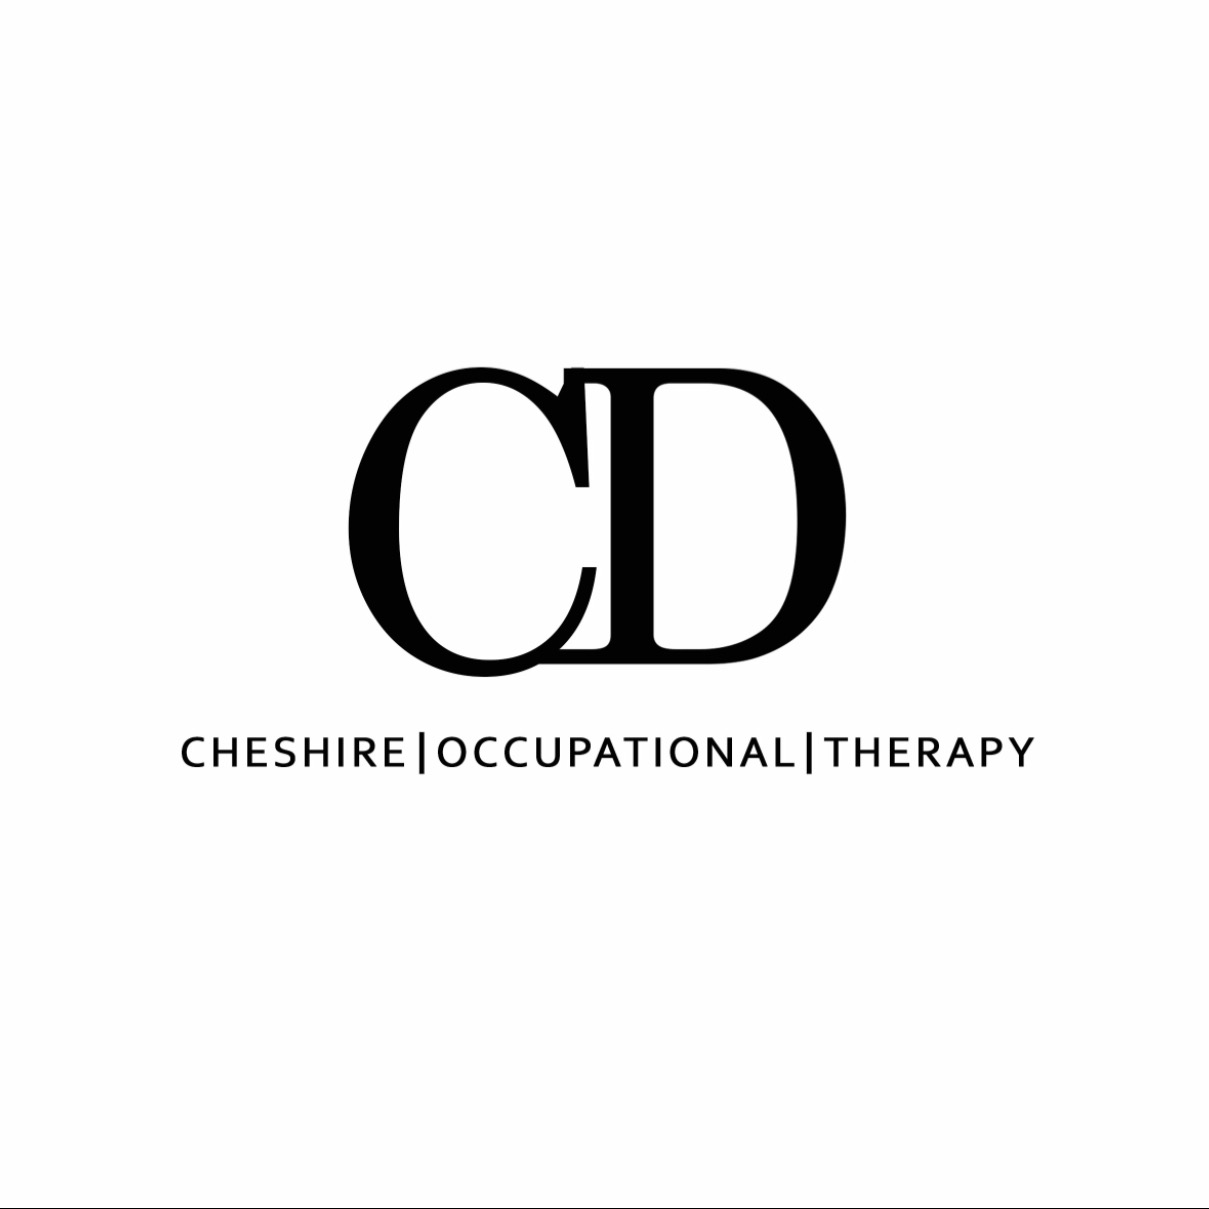 CD Cheshire Occupational Therapy 